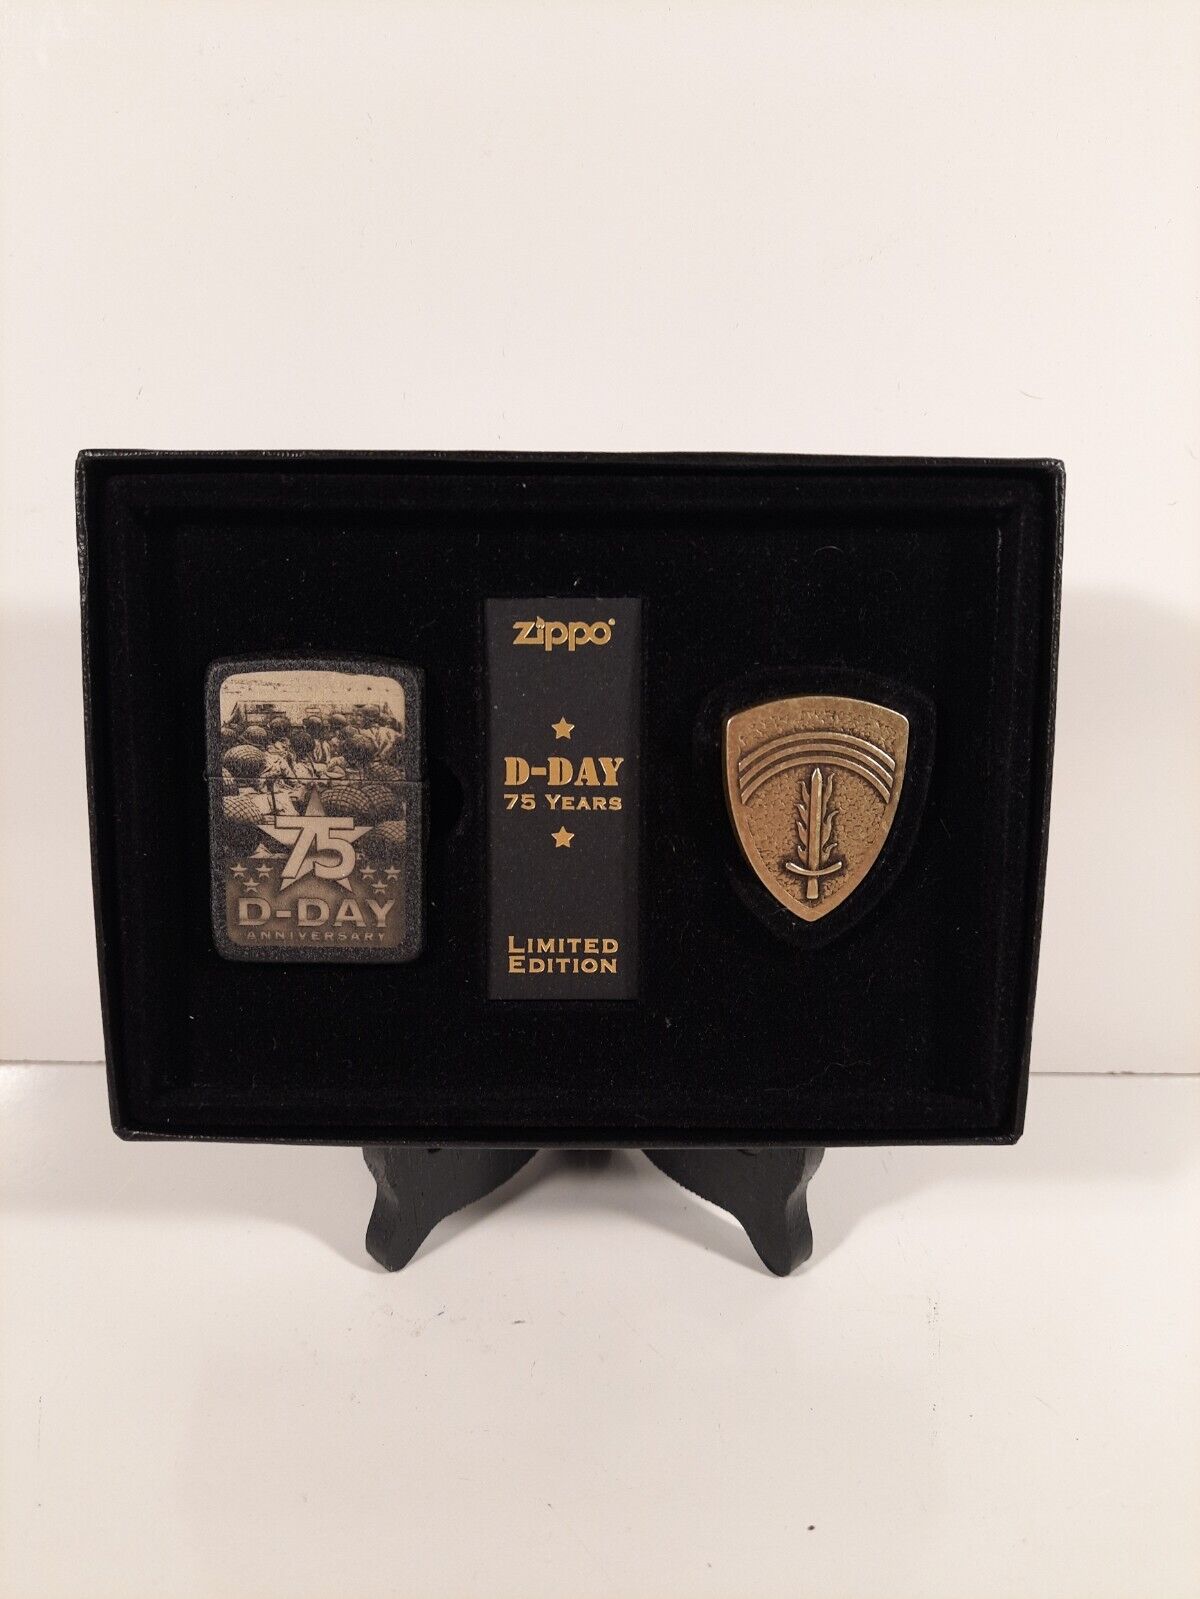 Zippo Windproof Lighter 1941 Black Crackle D-DAY Normandy 75th Anniversary NEW